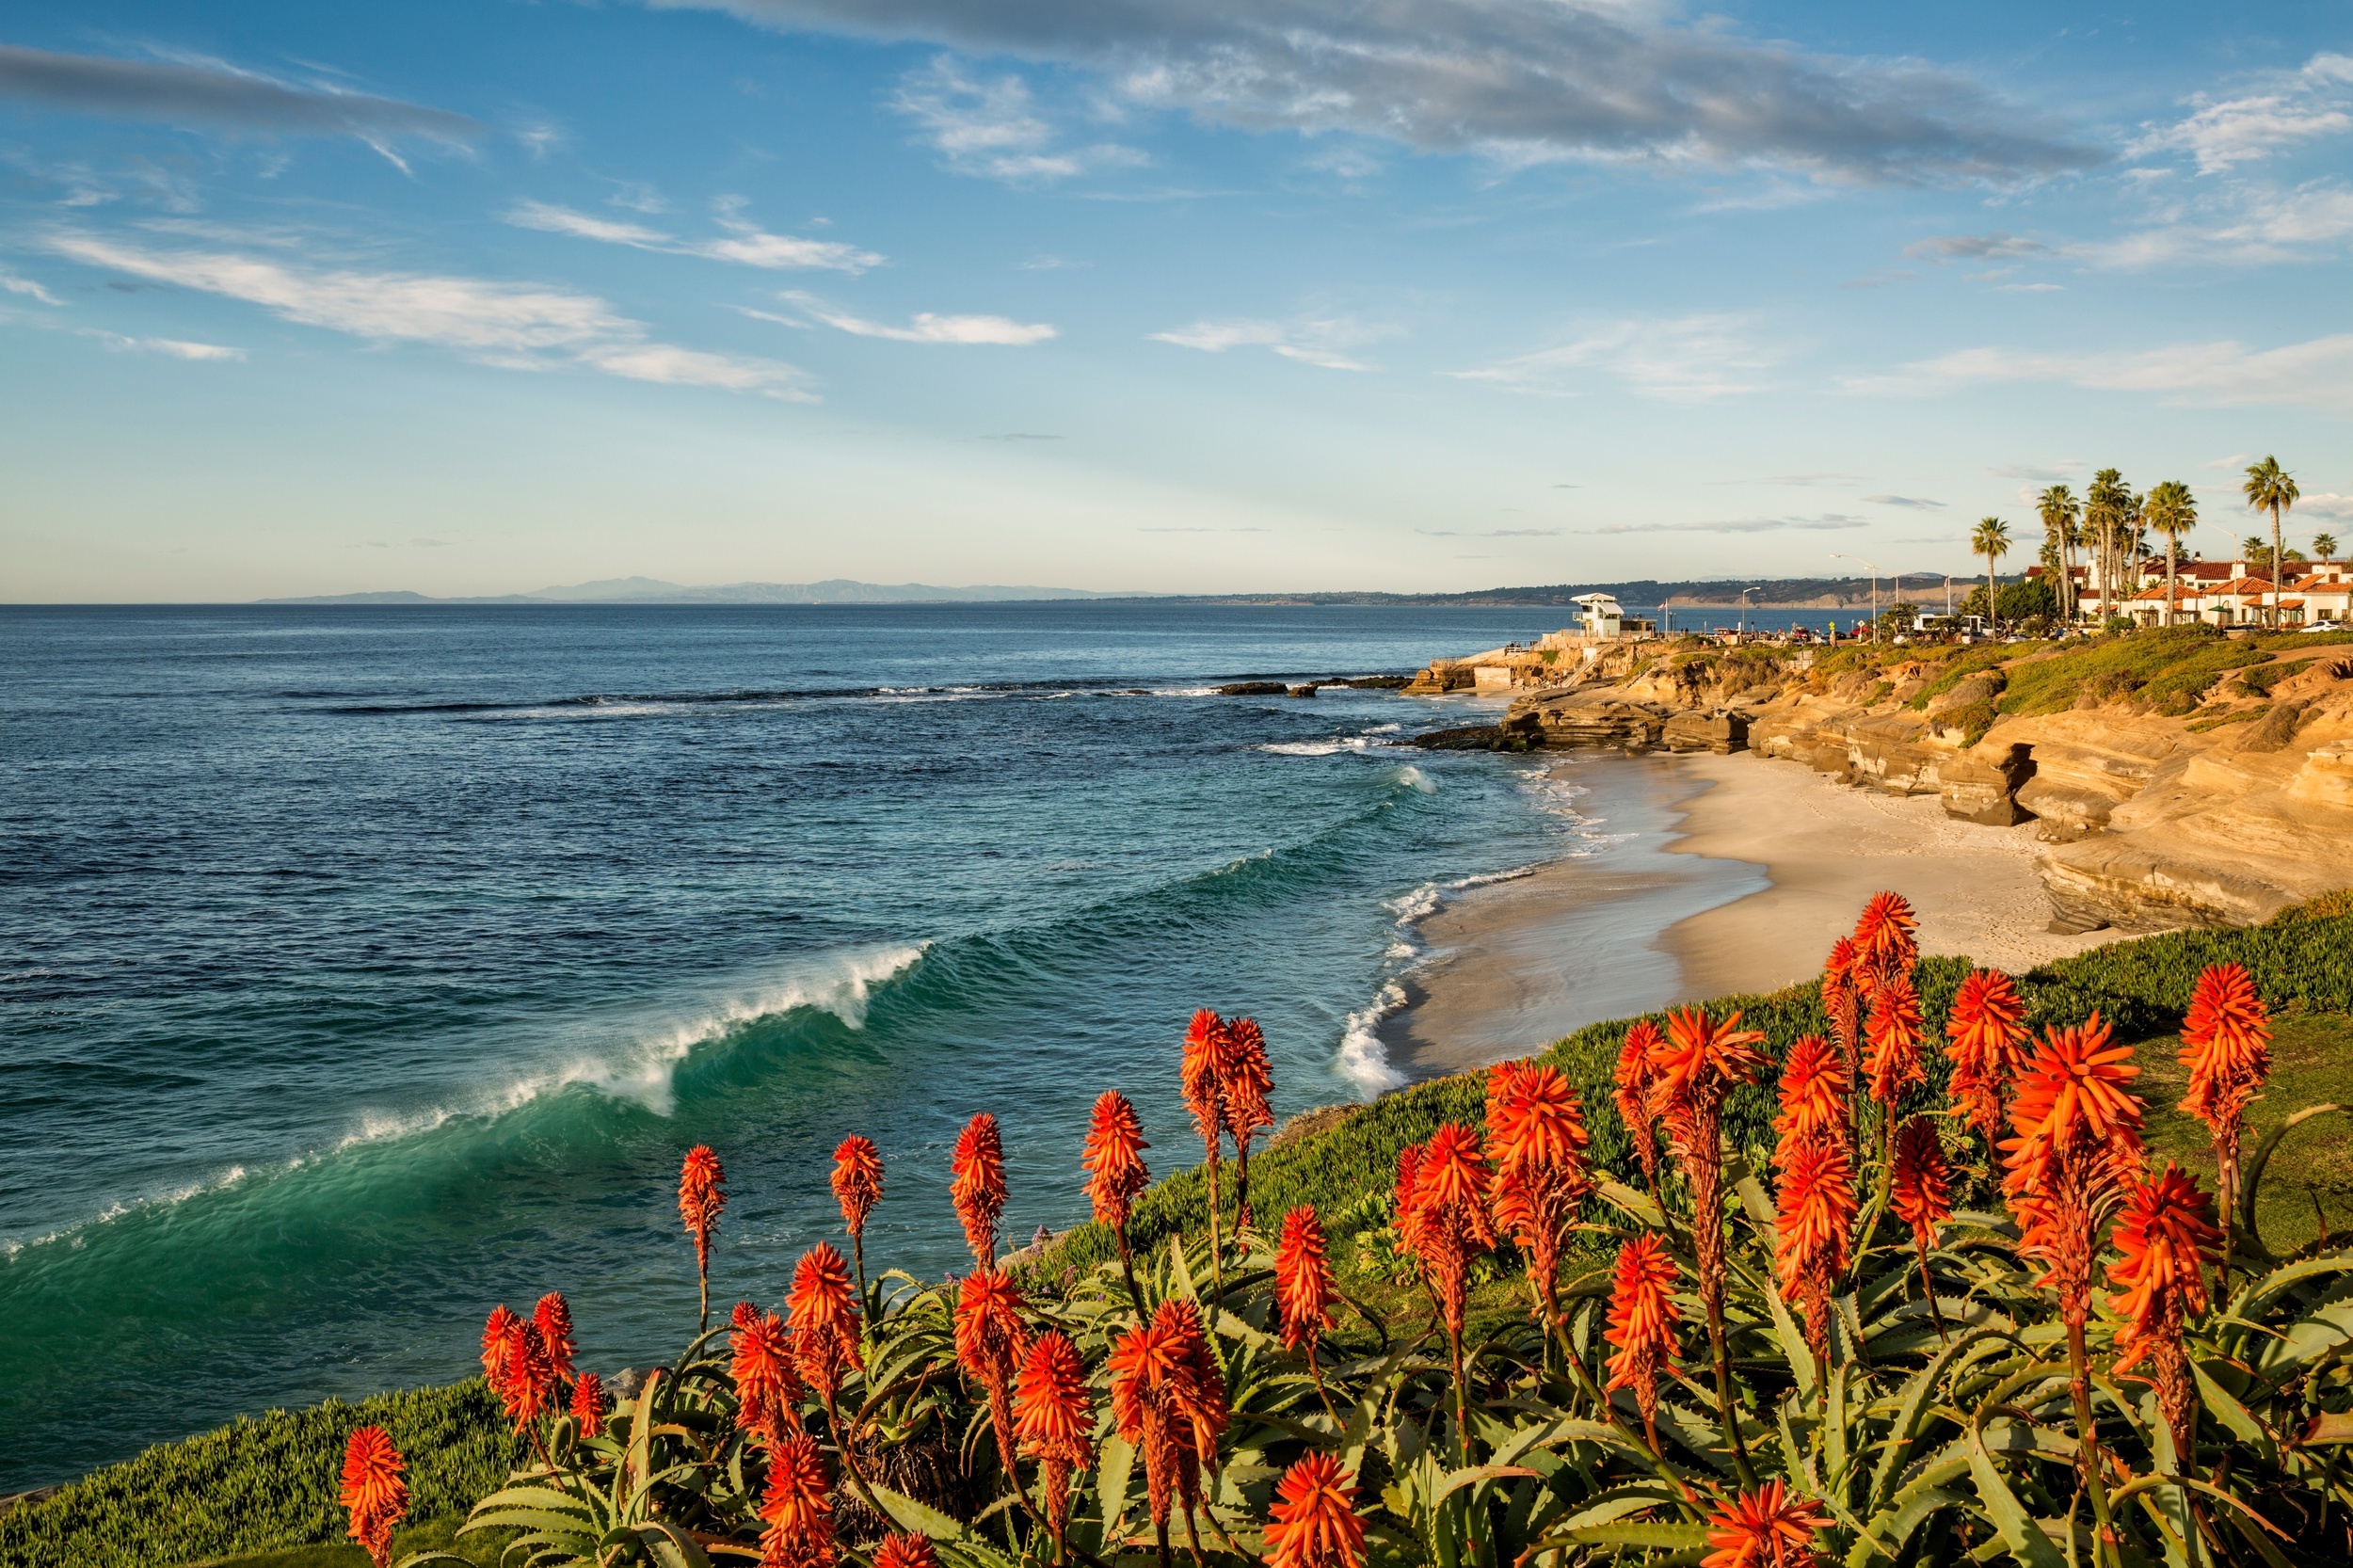 <p>Another popular domestic destination, San Diego has sun and sand throughout the year. And if you’re flying from somewhere in the West, it’s only a few hours away!</p><p>You may also like: <a href='https://www.yardbarker.com/lifestyle/articles/cold_as_ice_20_foods_that_freeze_the_best/s1__34465163'>Cold as ice: 20 foods that freeze the best</a></p>